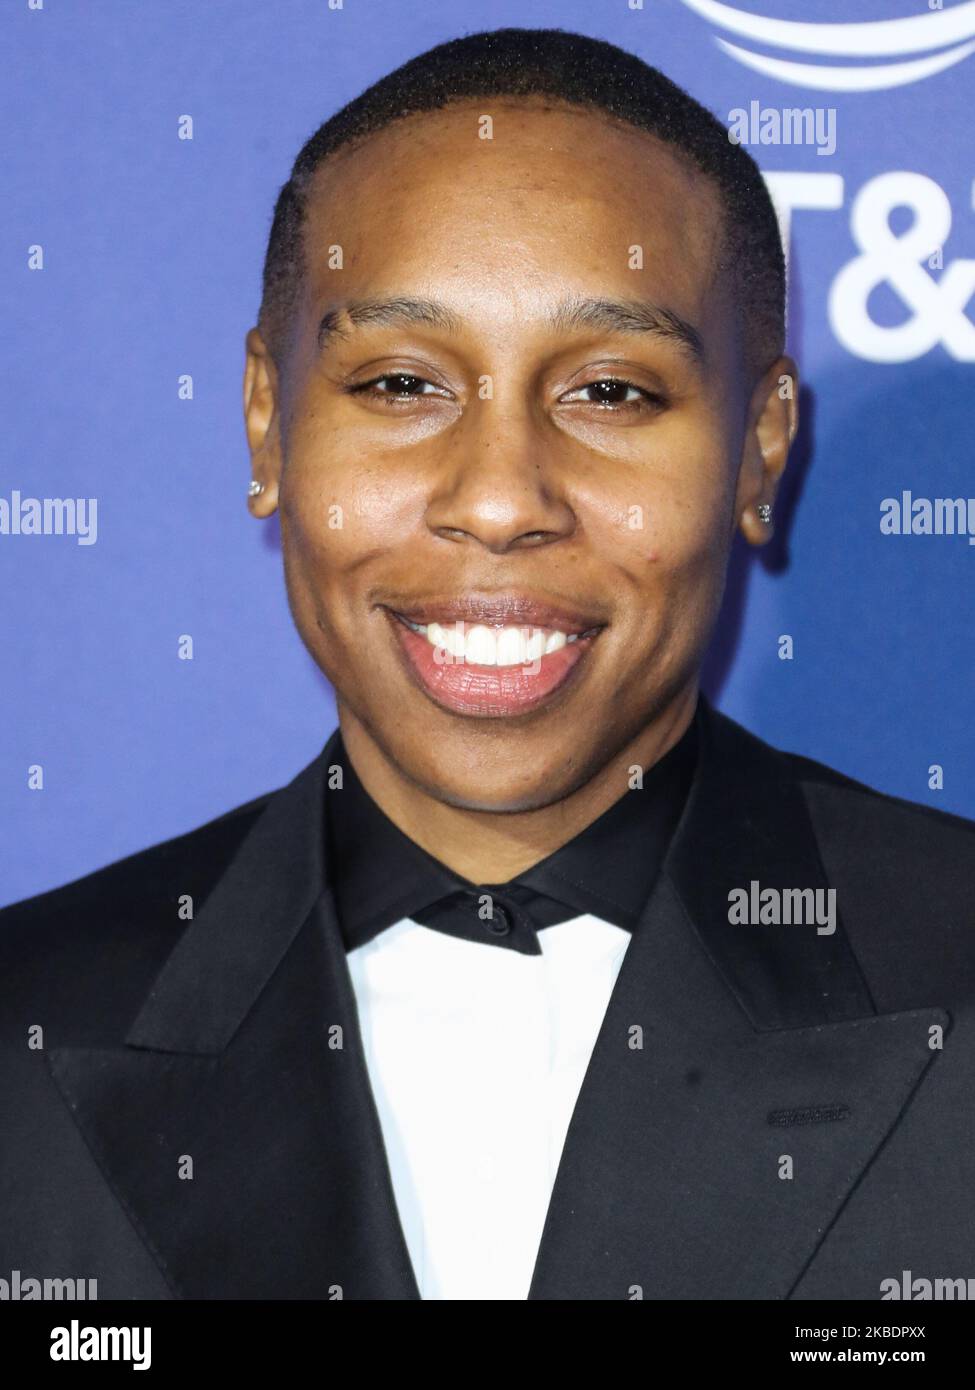 PALM SPRINGS, CALIFORNIA, USA - JANUARY 02: Lena Waithe arrives at the 31st Annual Palm Springs International Film Festival Awards Gala held at the Palm Springs Convention Center on January 2, 2020 in Palm Springs, California, United States. (Photo by Xavier Collin/Image Press Agency/NurPhoto) Stock Photo